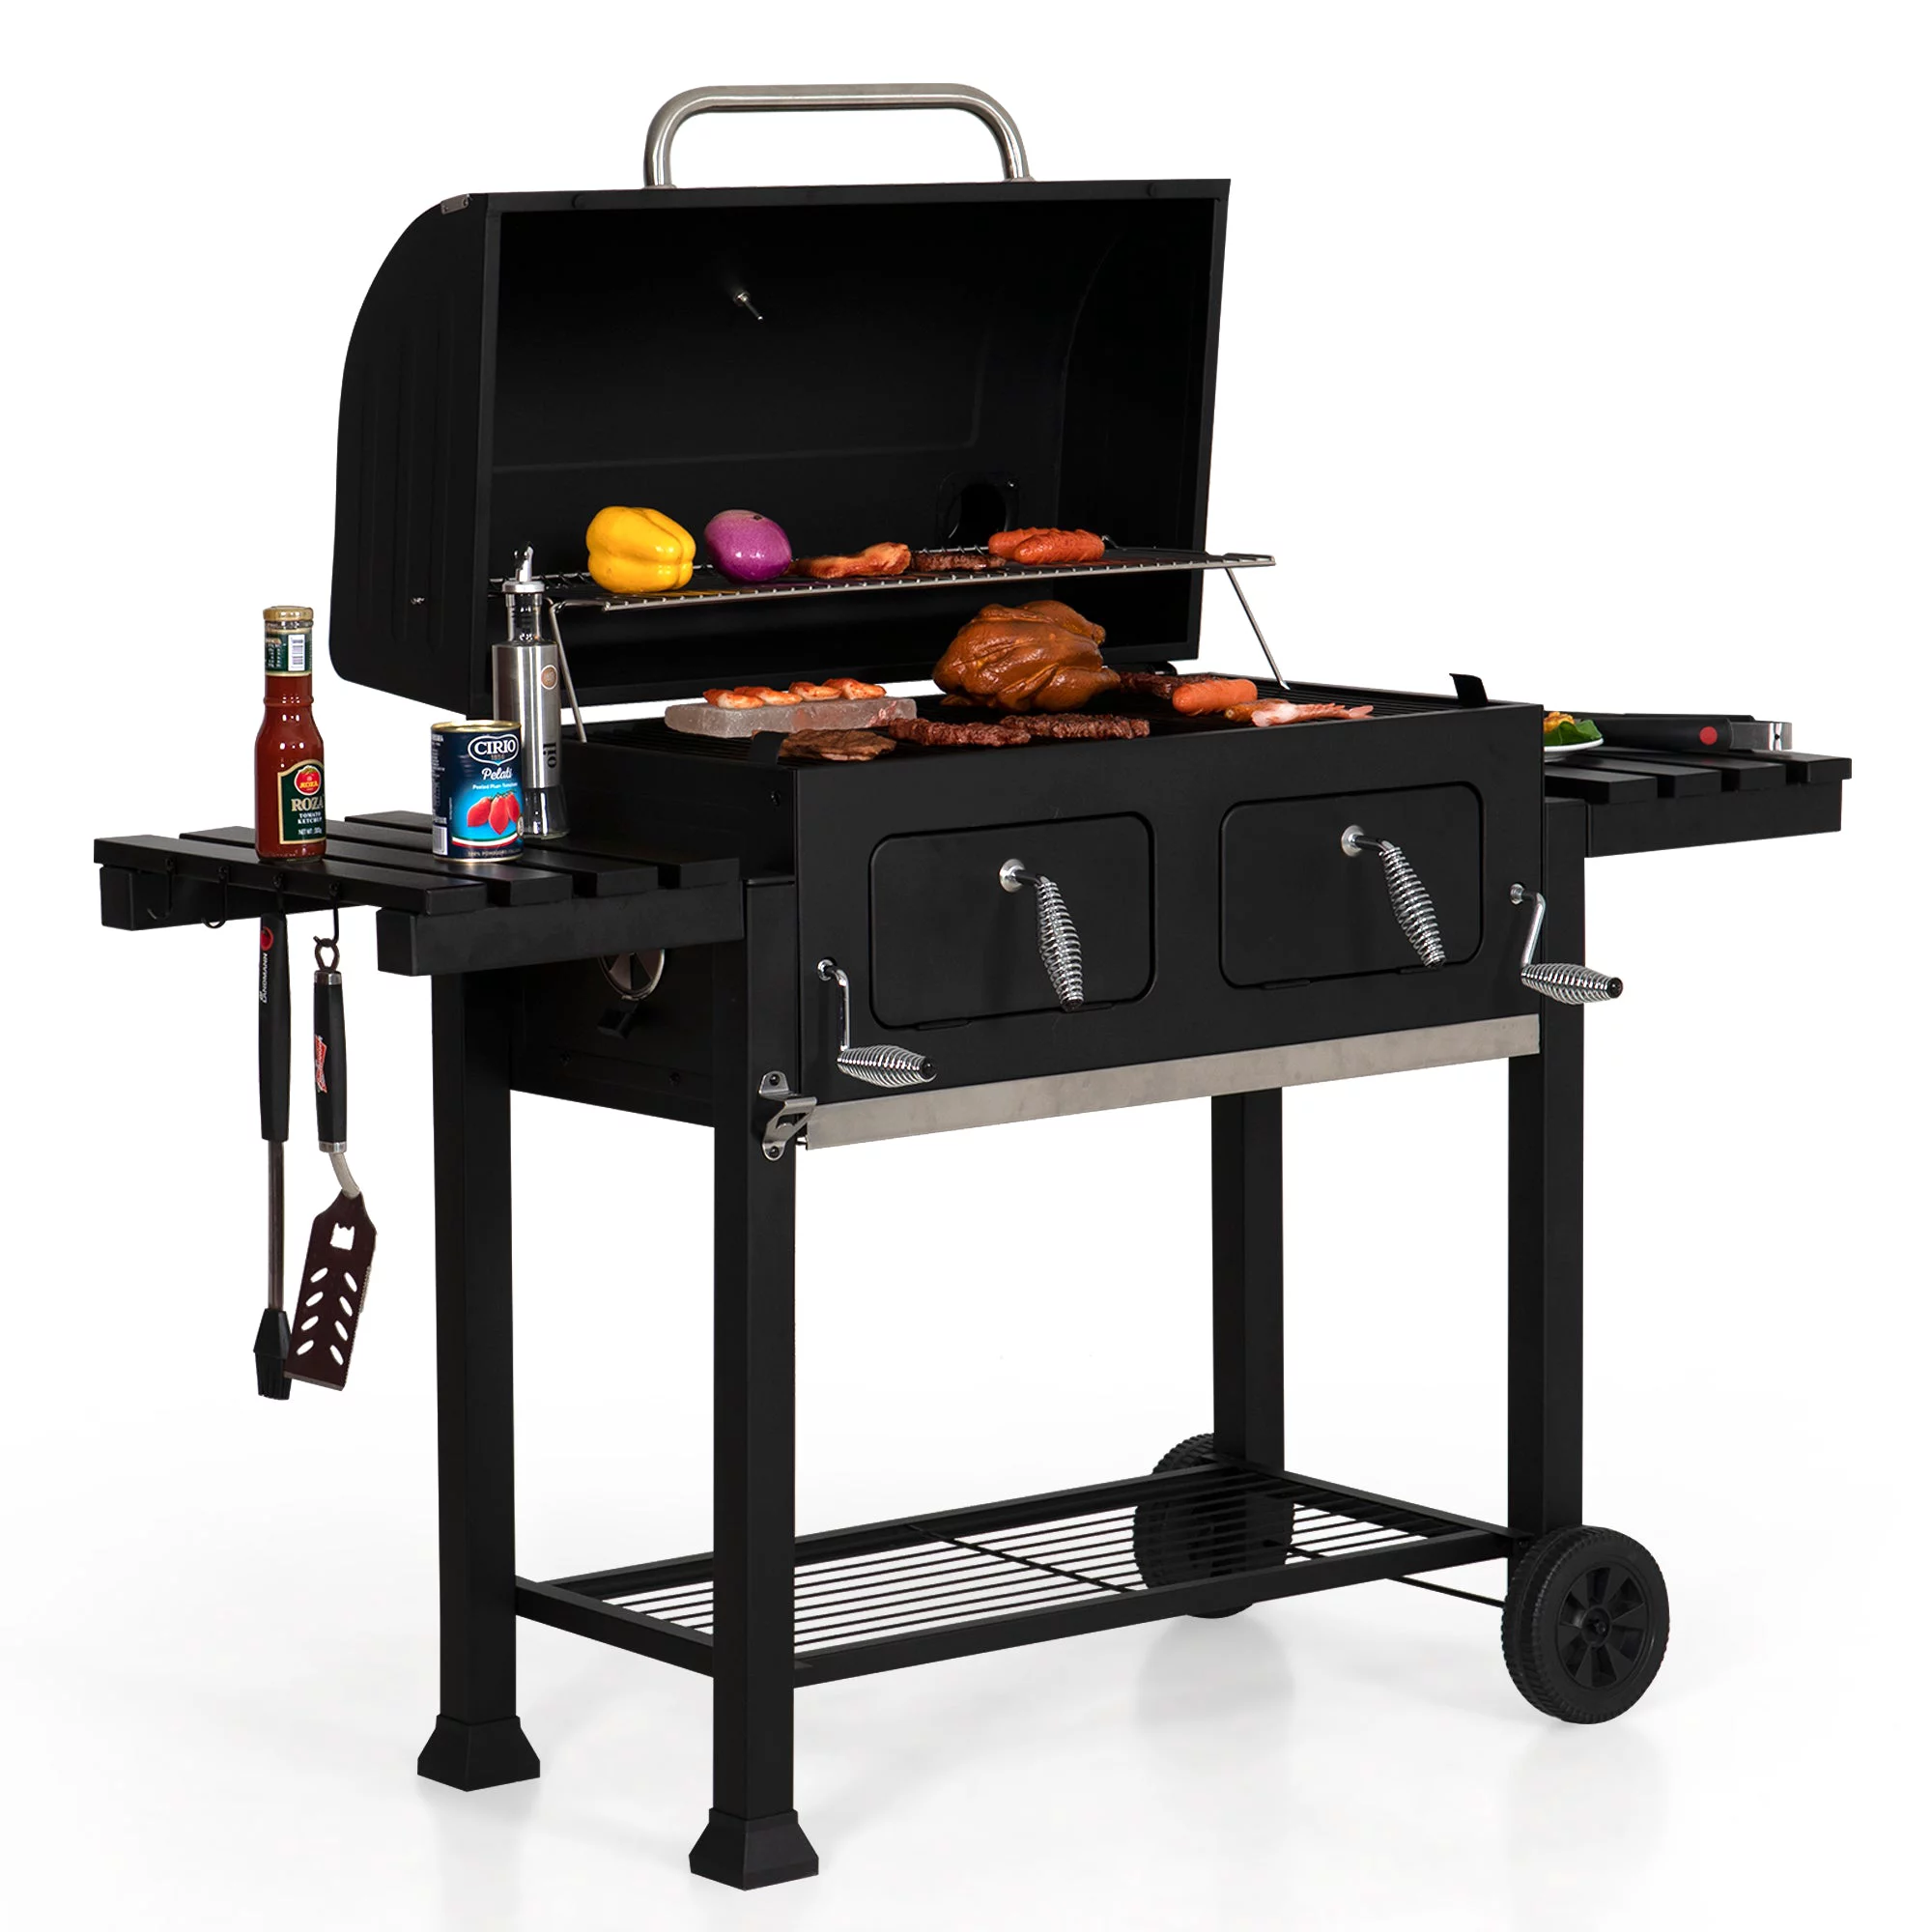 https://discounttoday.net/wp-content/uploads/2023/04/Sophia-William-34-inch-BBQ-Charcoal-Grill-Outdoor-Portable-Barbecue-Grill-1.webp